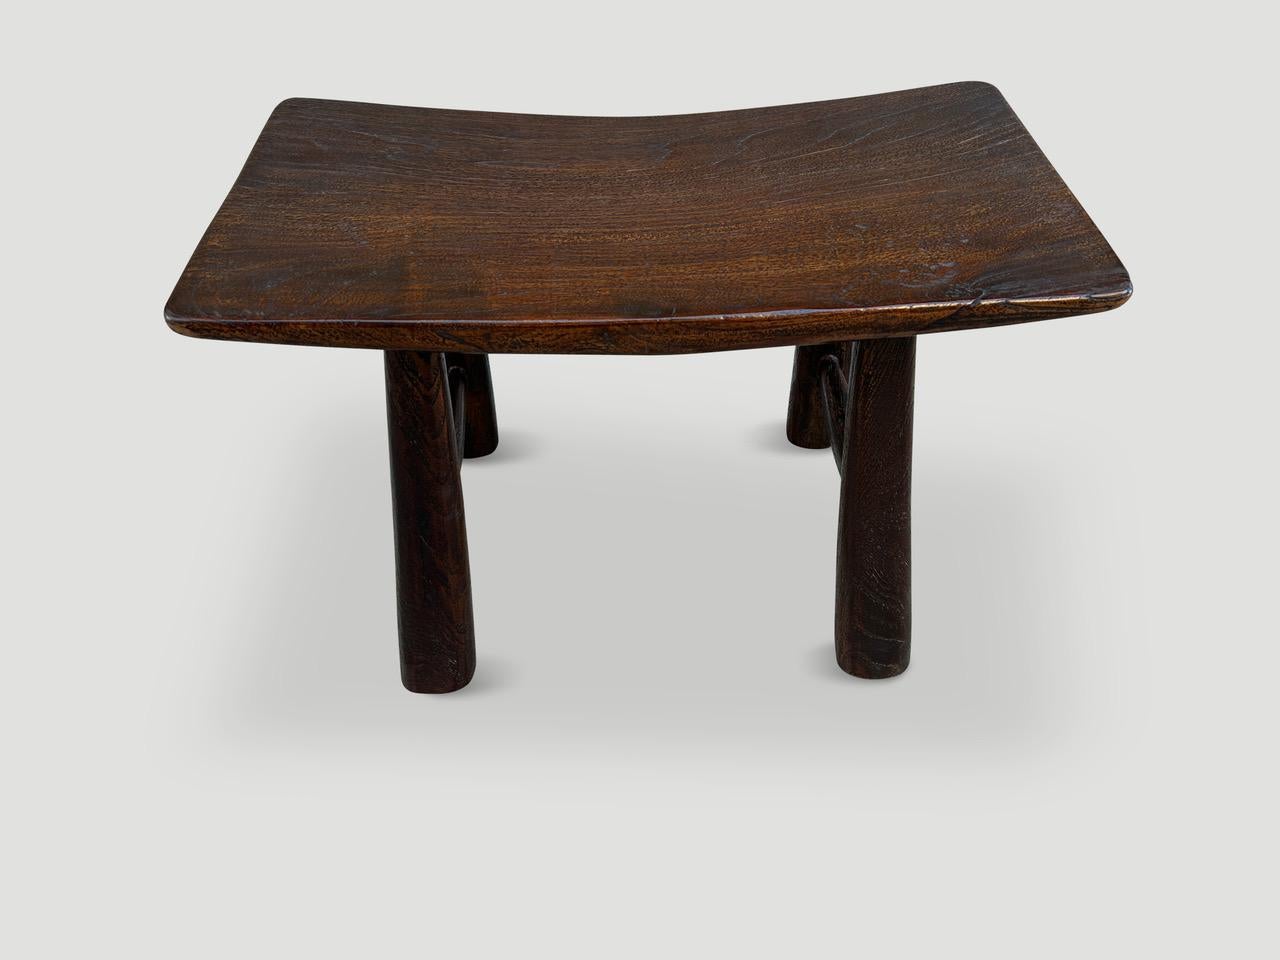 A beautiful antique single teak panel from my finest collection, is expertly shaped into this beautiful bench or stool. Part of the Mid Century Couture Collection. Furniture constructed by hand from start to finish. We added soft rounded mid century